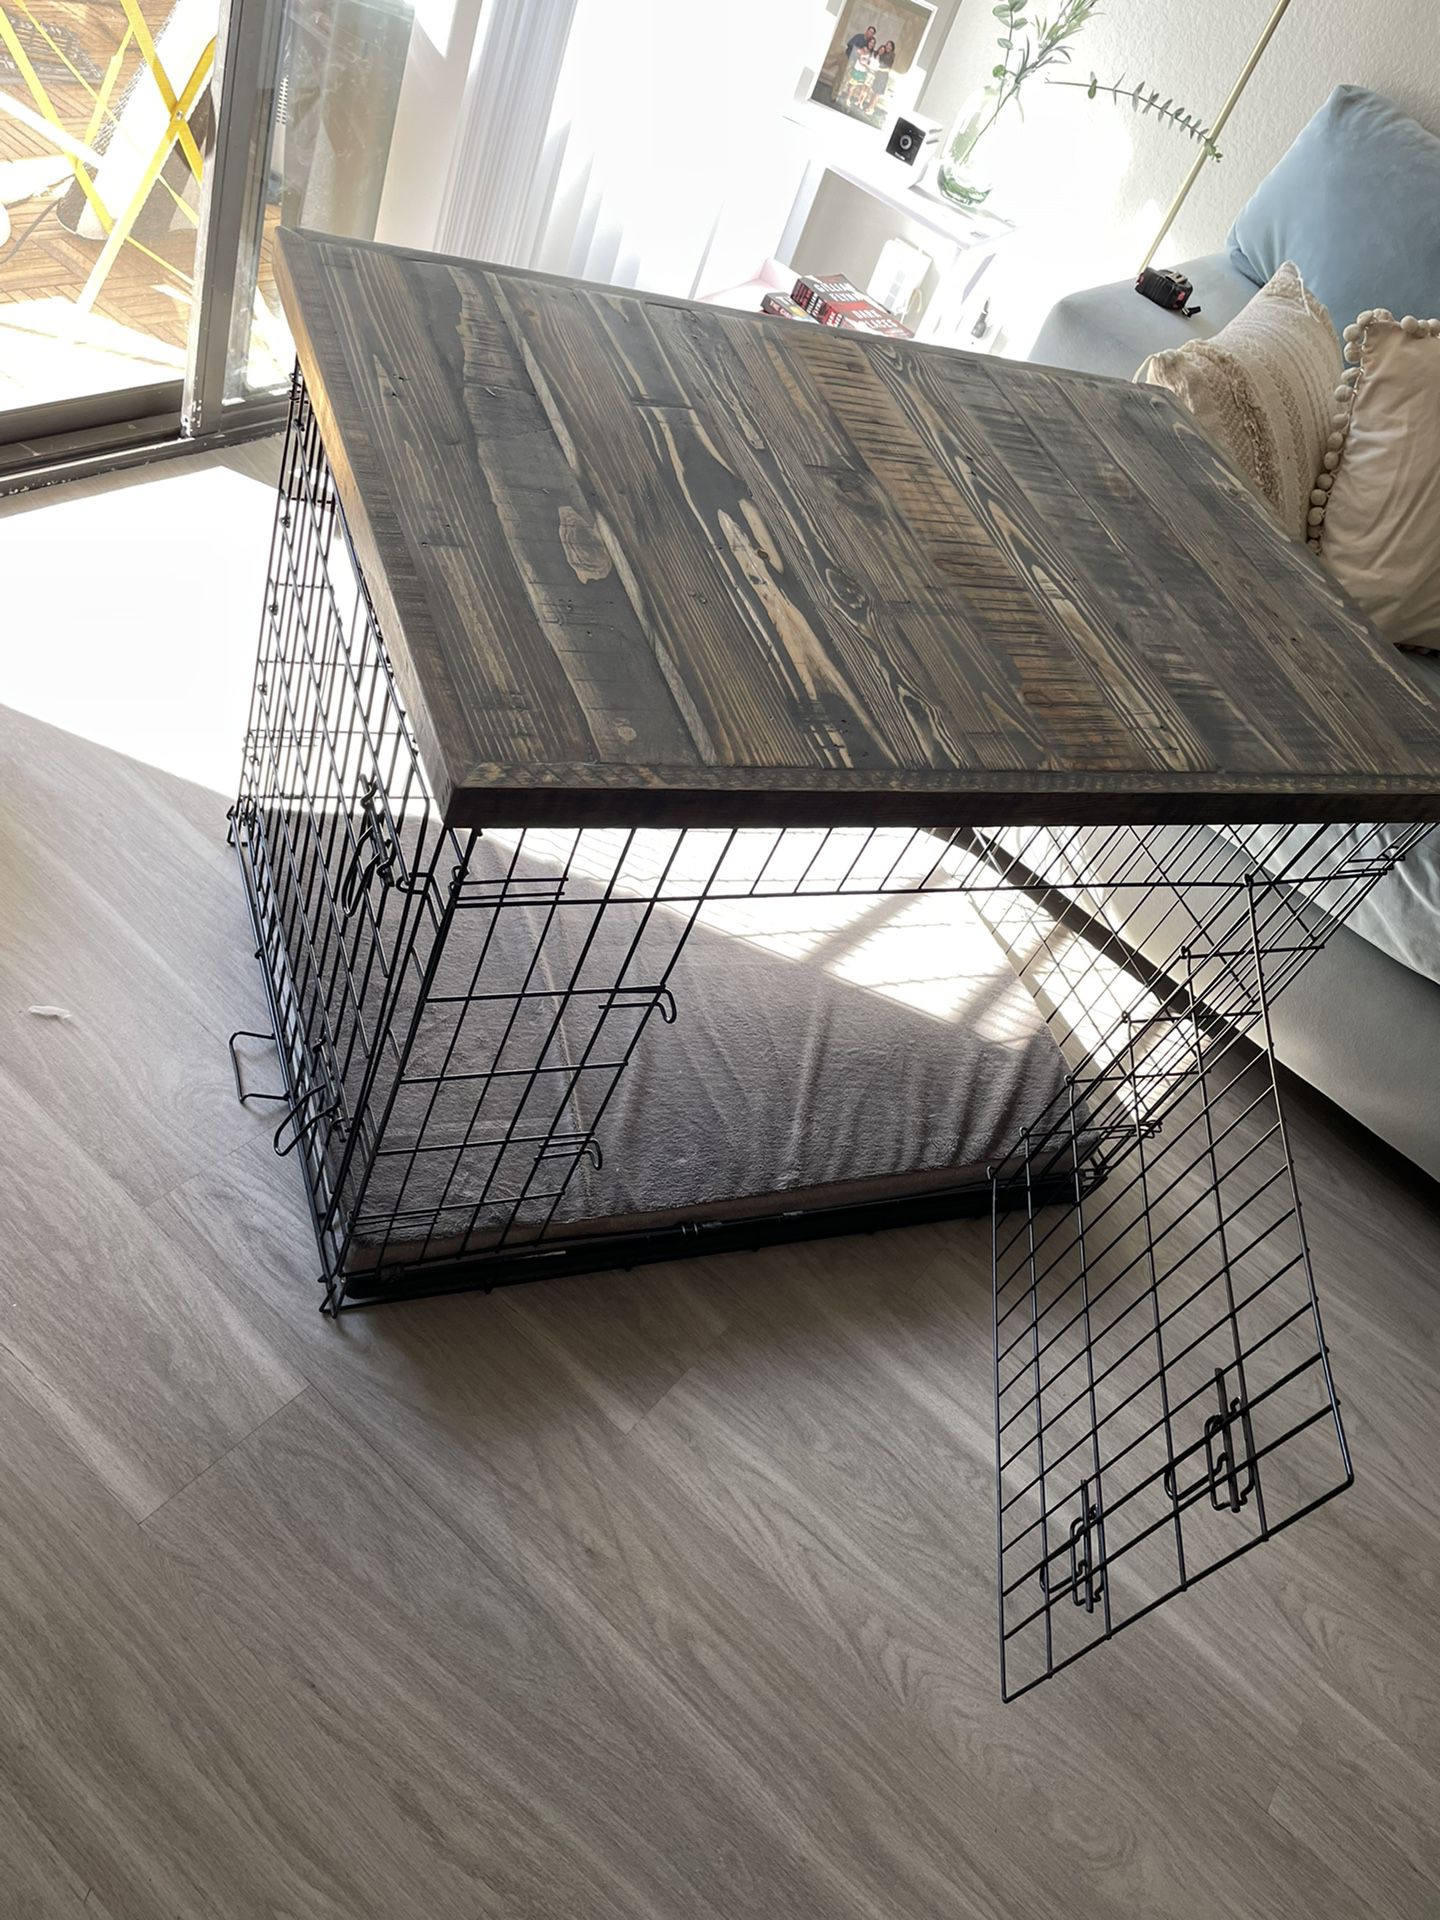 Dog Crate / Cage